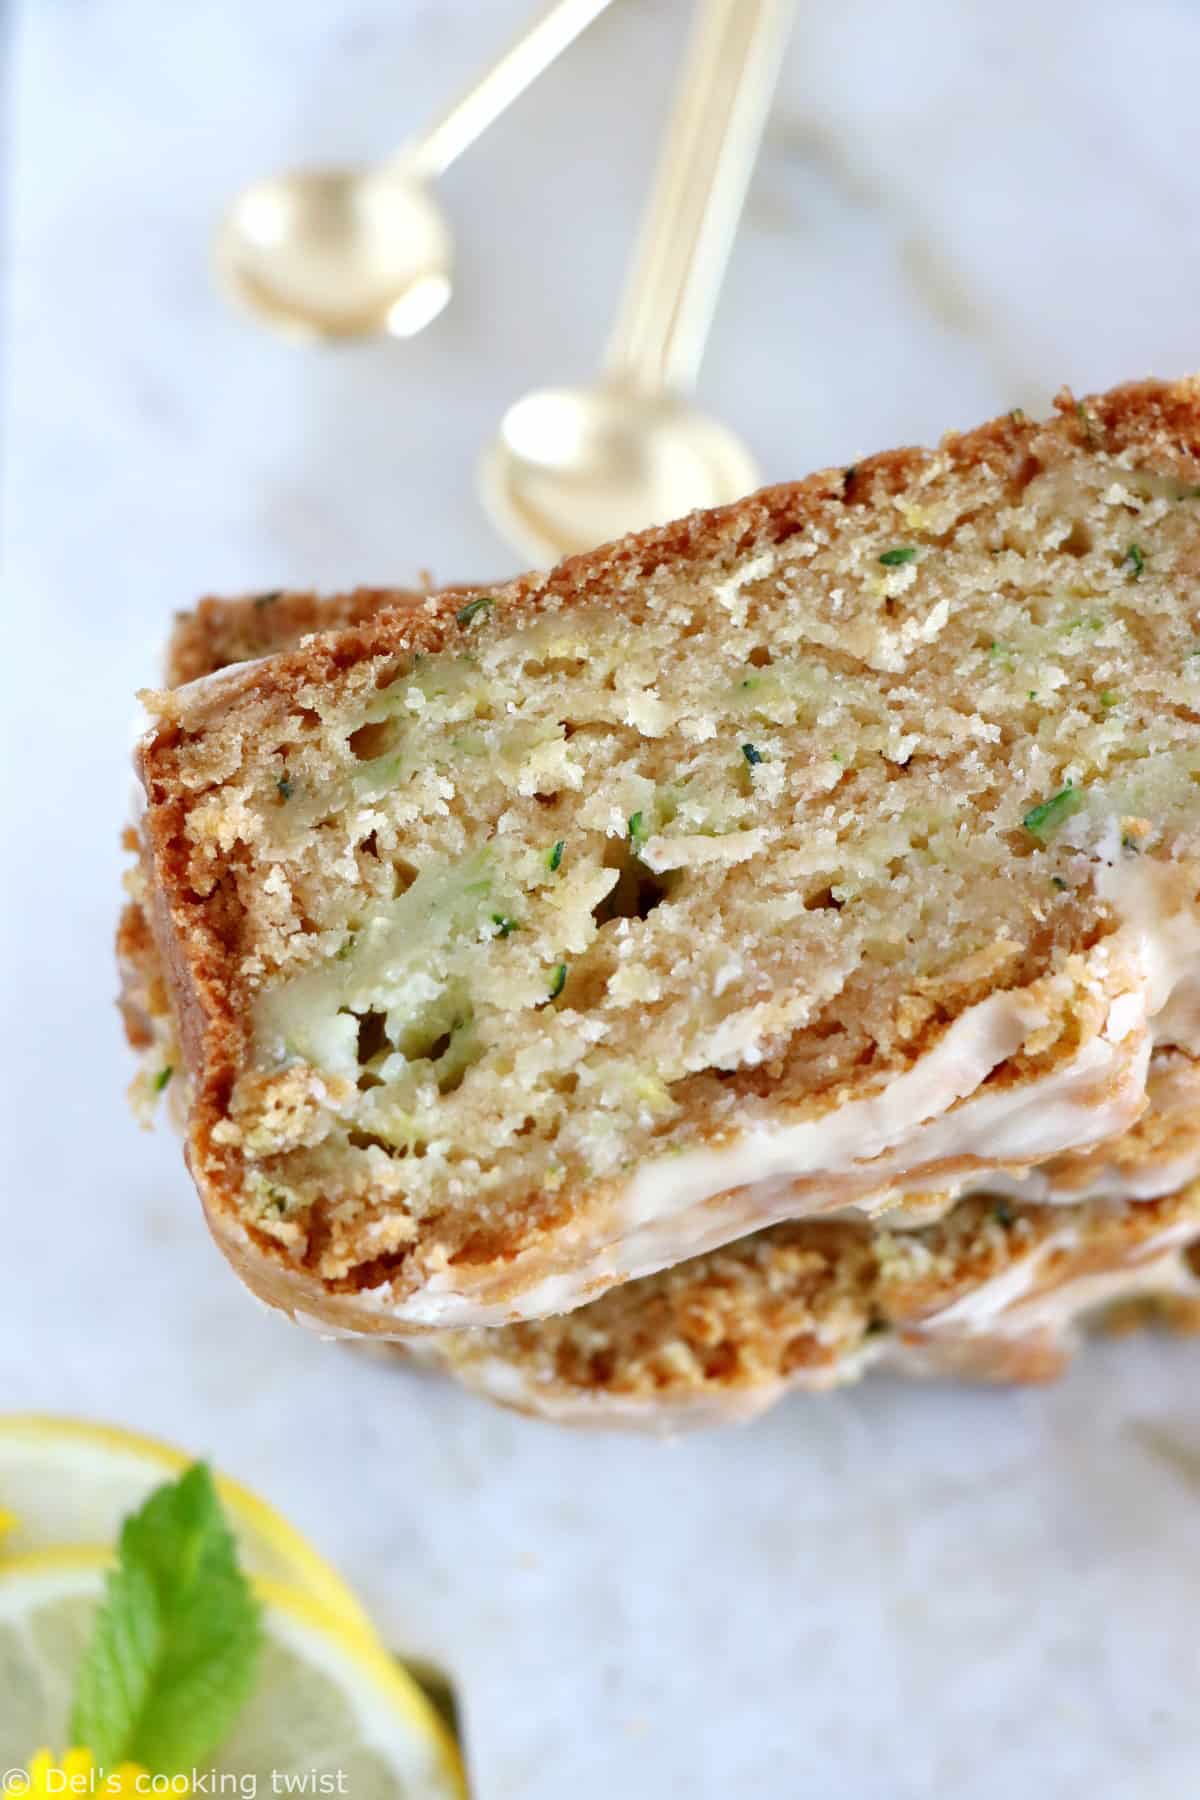 This healthy vegan lemon zucchini bread is light, fluffy and perfectly tender, with a subtle lemon glaze.